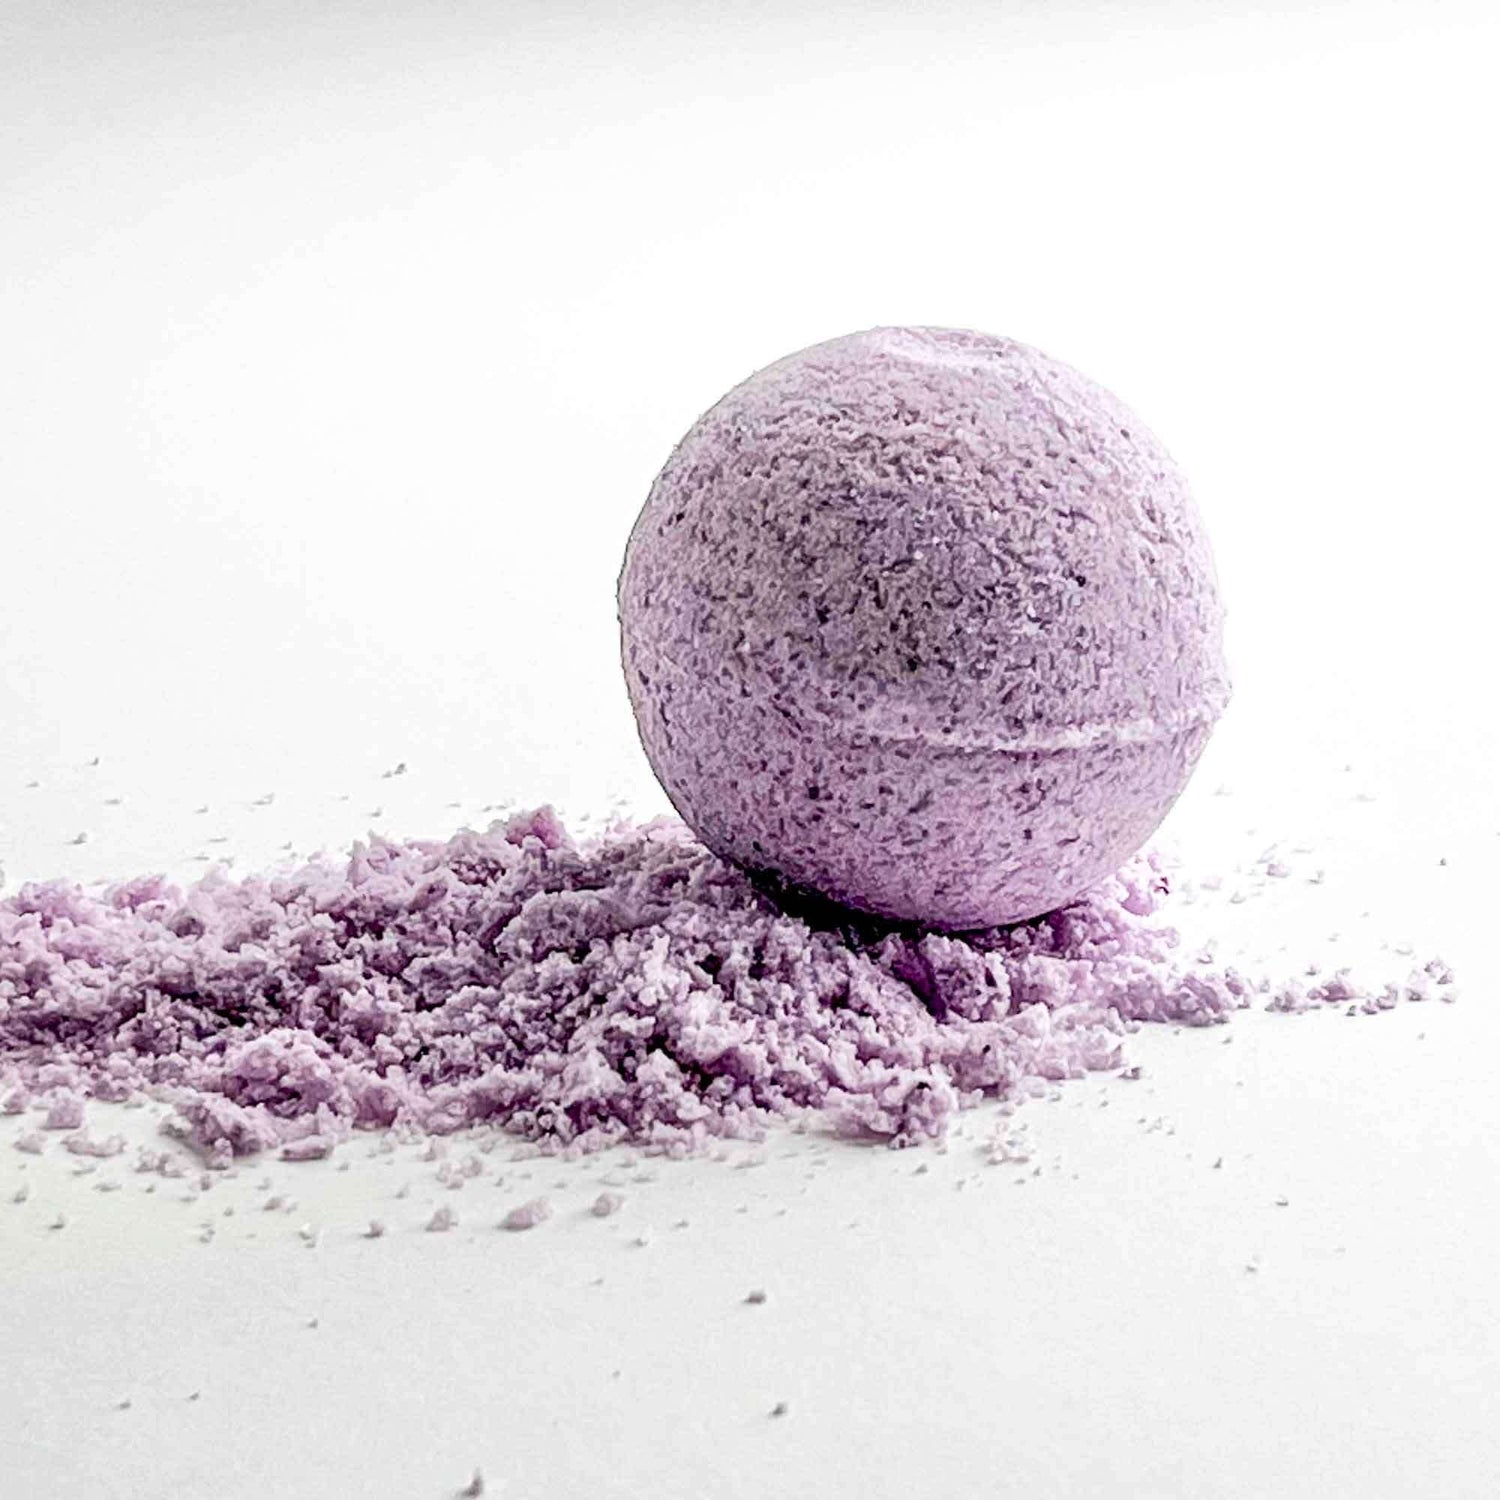 Relax and Rejuvenate with Our Handmade Lilac Rose Bath Bombs - Natural, Organic and Luxurious